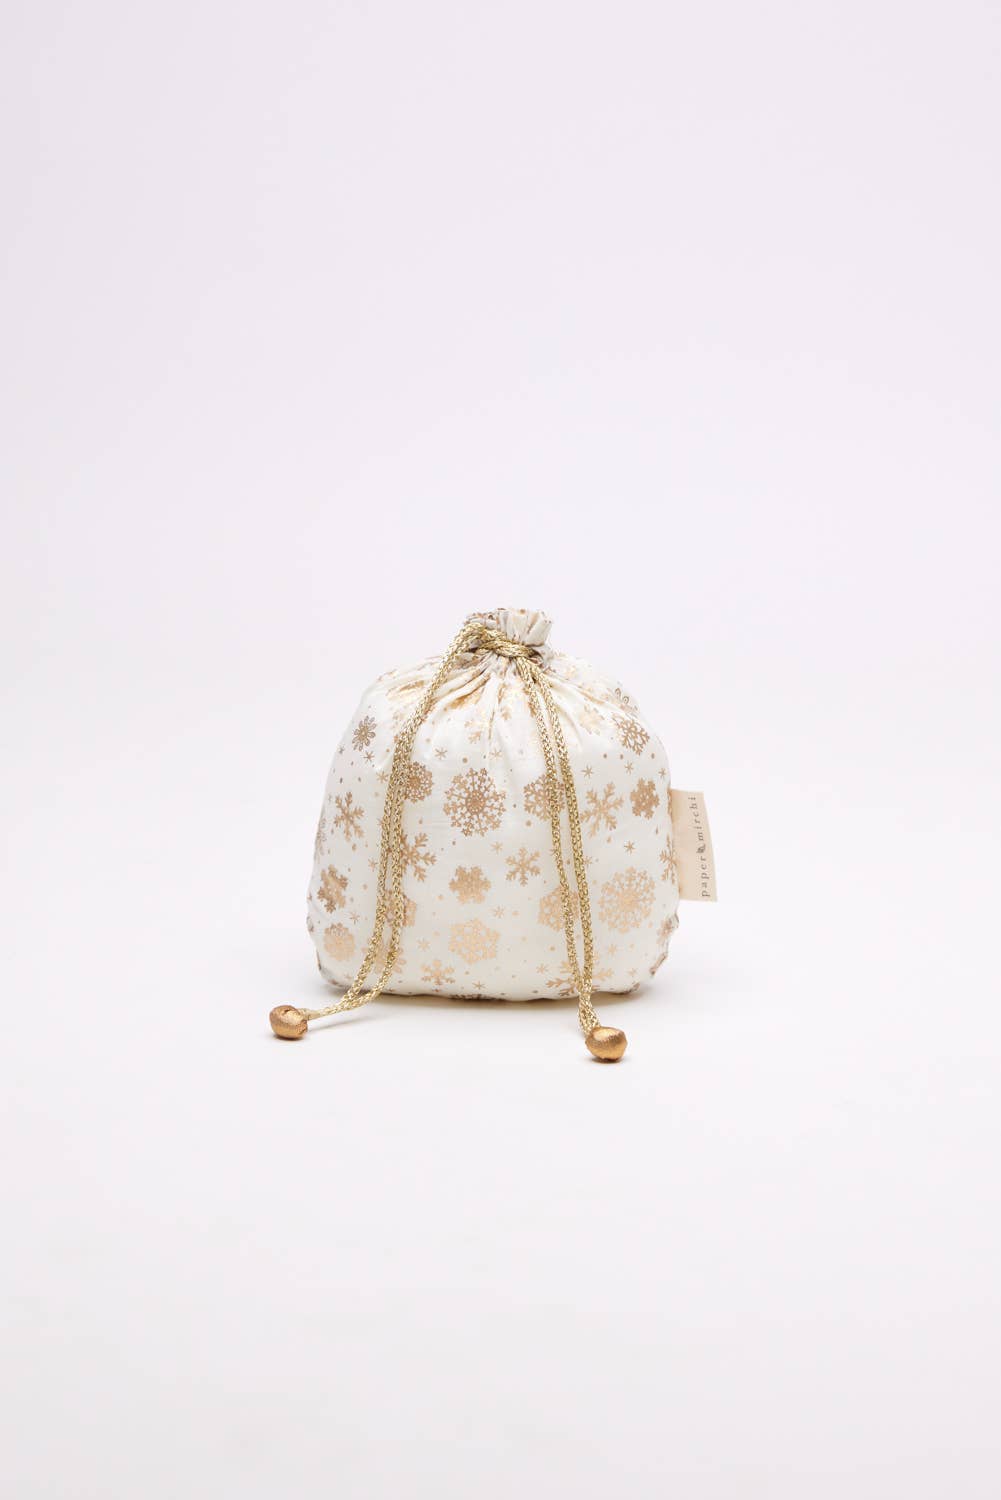 Reusable Fabric Gift Bags Double Drawstring - Hand Block Printed - Medium - H23cm x W19cm / Gold Frost